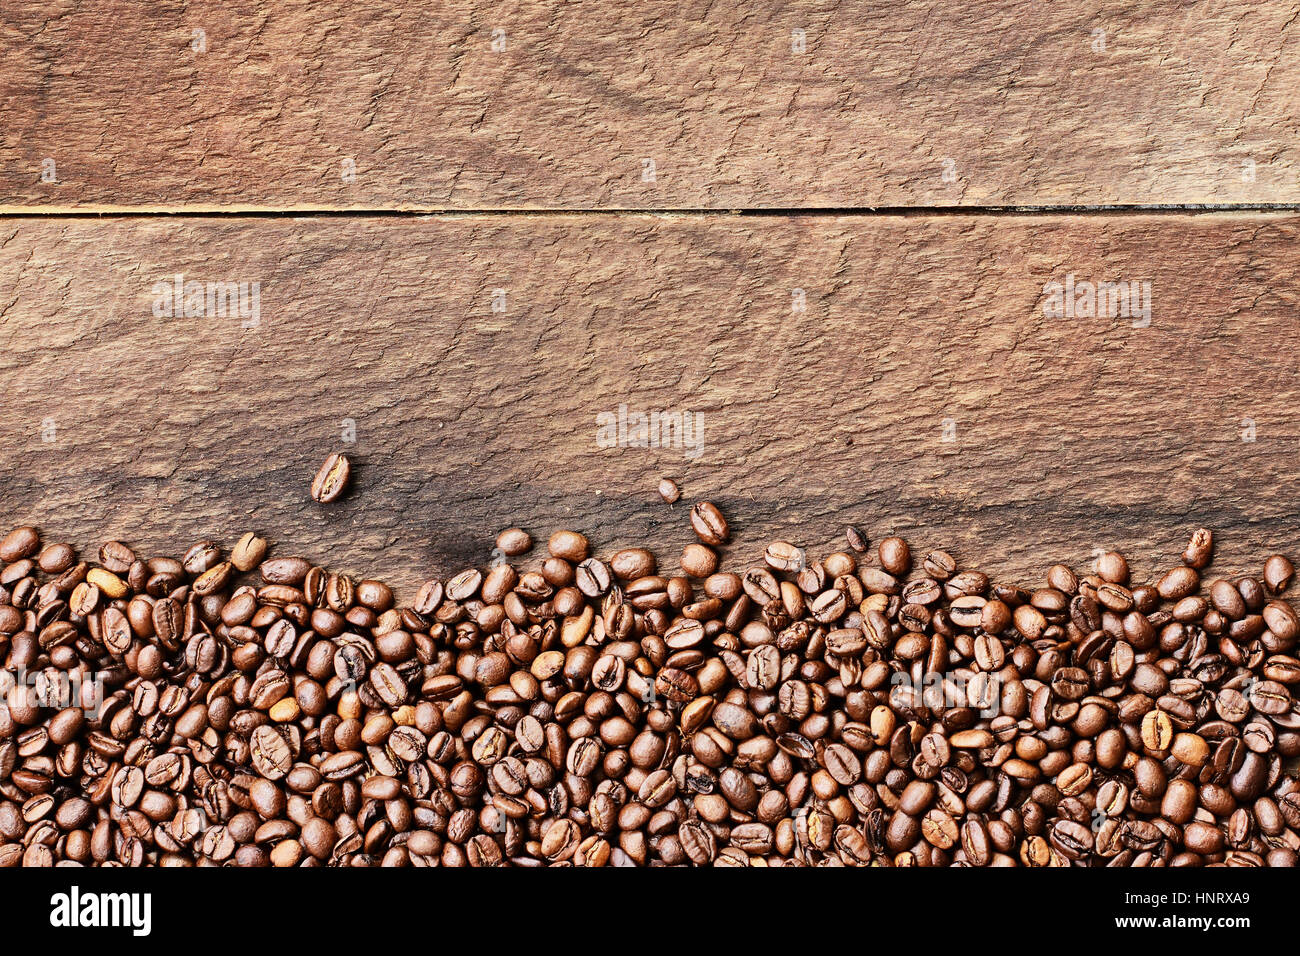 Overhead shot looking down on a flatlay image of coffee beans over a rustic wood table top background with copy space. Stock Photo